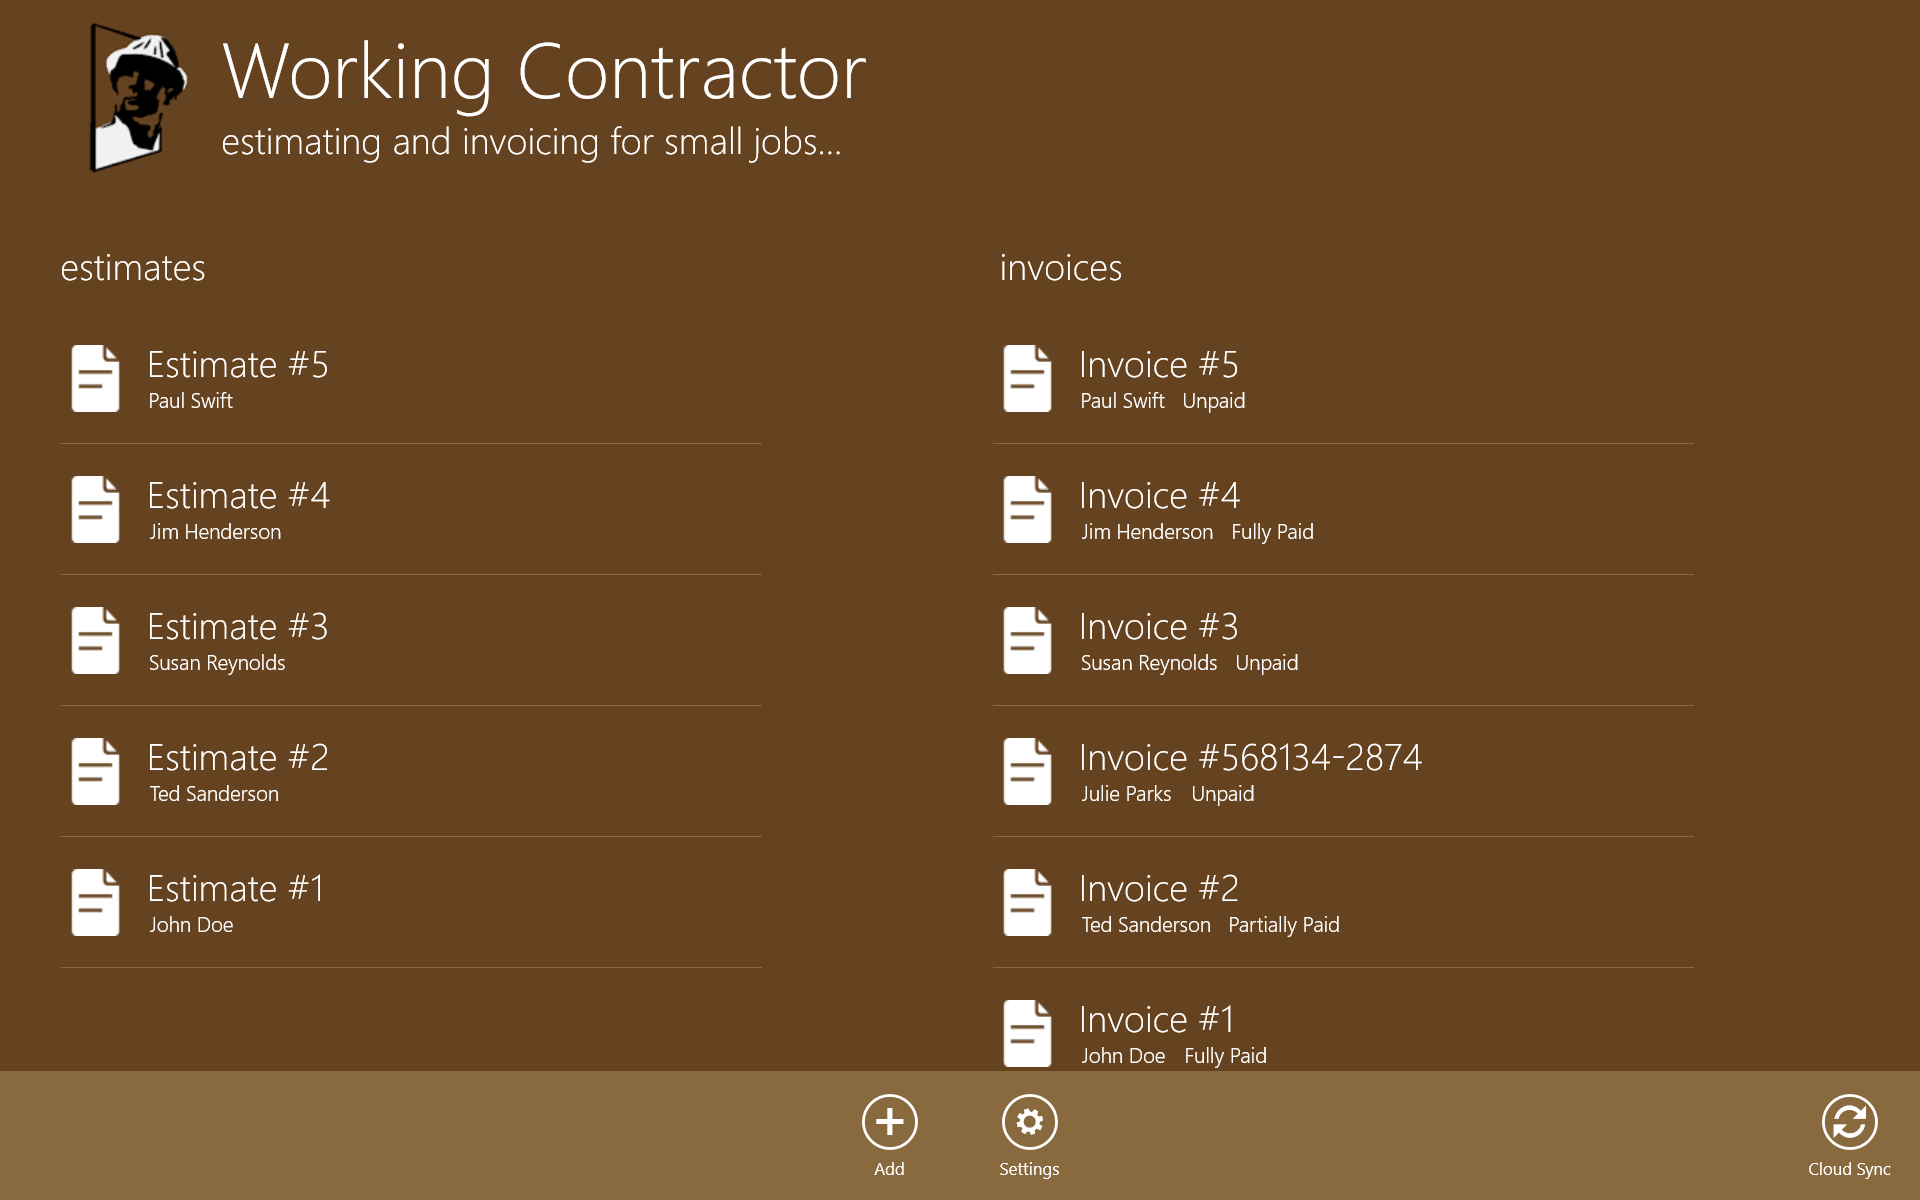 Manage all of your estimates and invoices in one spot. The Working Contractor app is all about convenience.